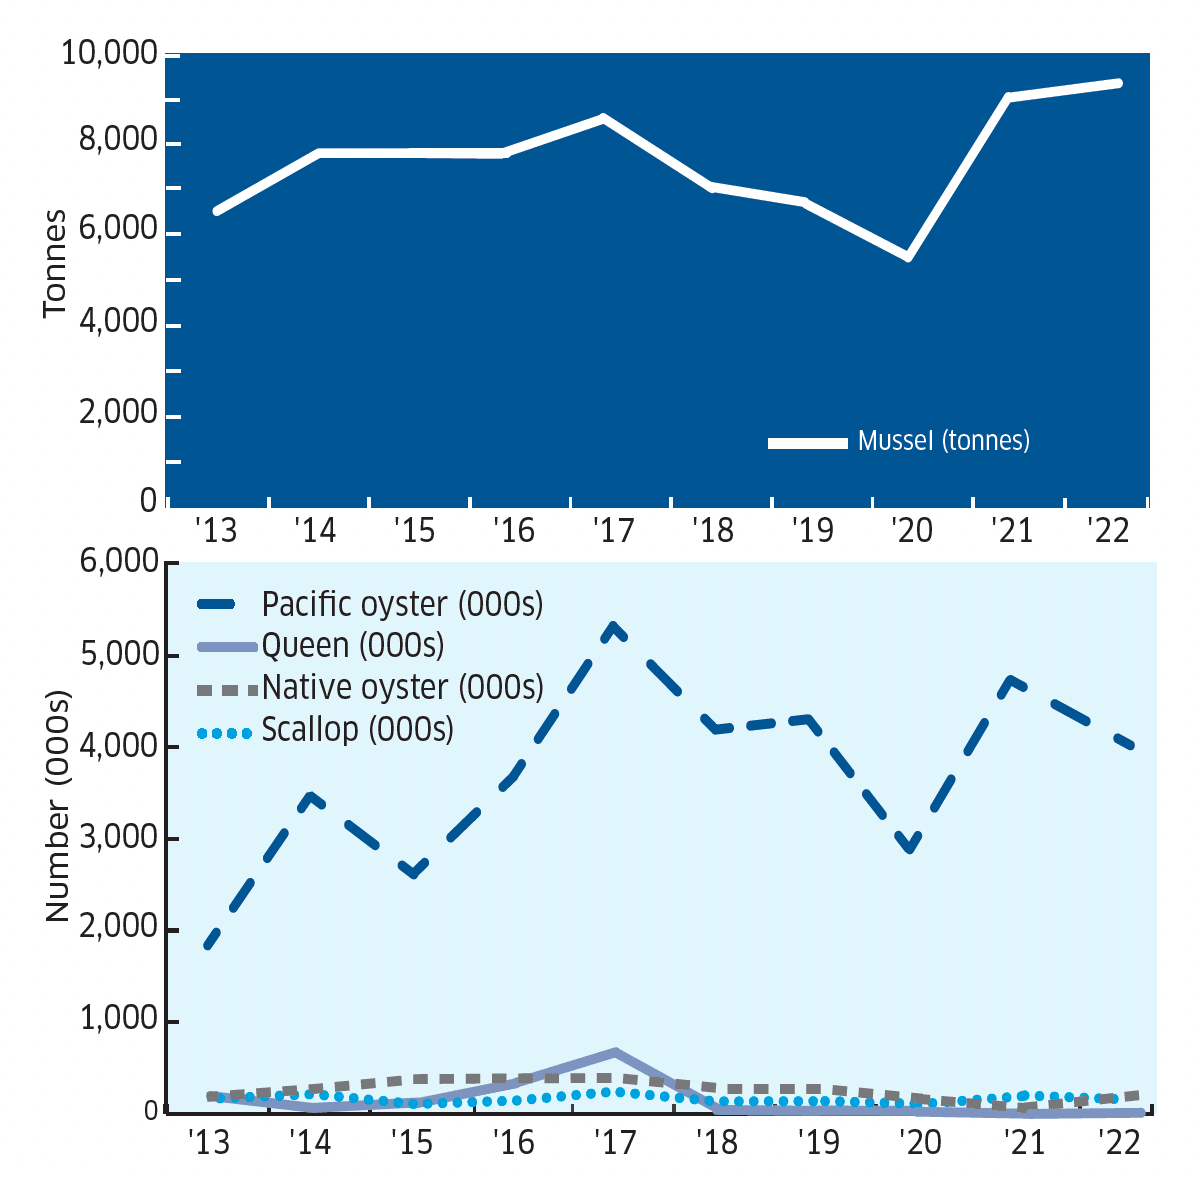 Two line graphs. The first one showing mussel production totals (in tonnes) for the years 2013 through to 2022. The second showing Pacific oyster, Queen scallop, native oyster and scallop production total (by number of thousands of shells) for the years 2013 through to 2022.